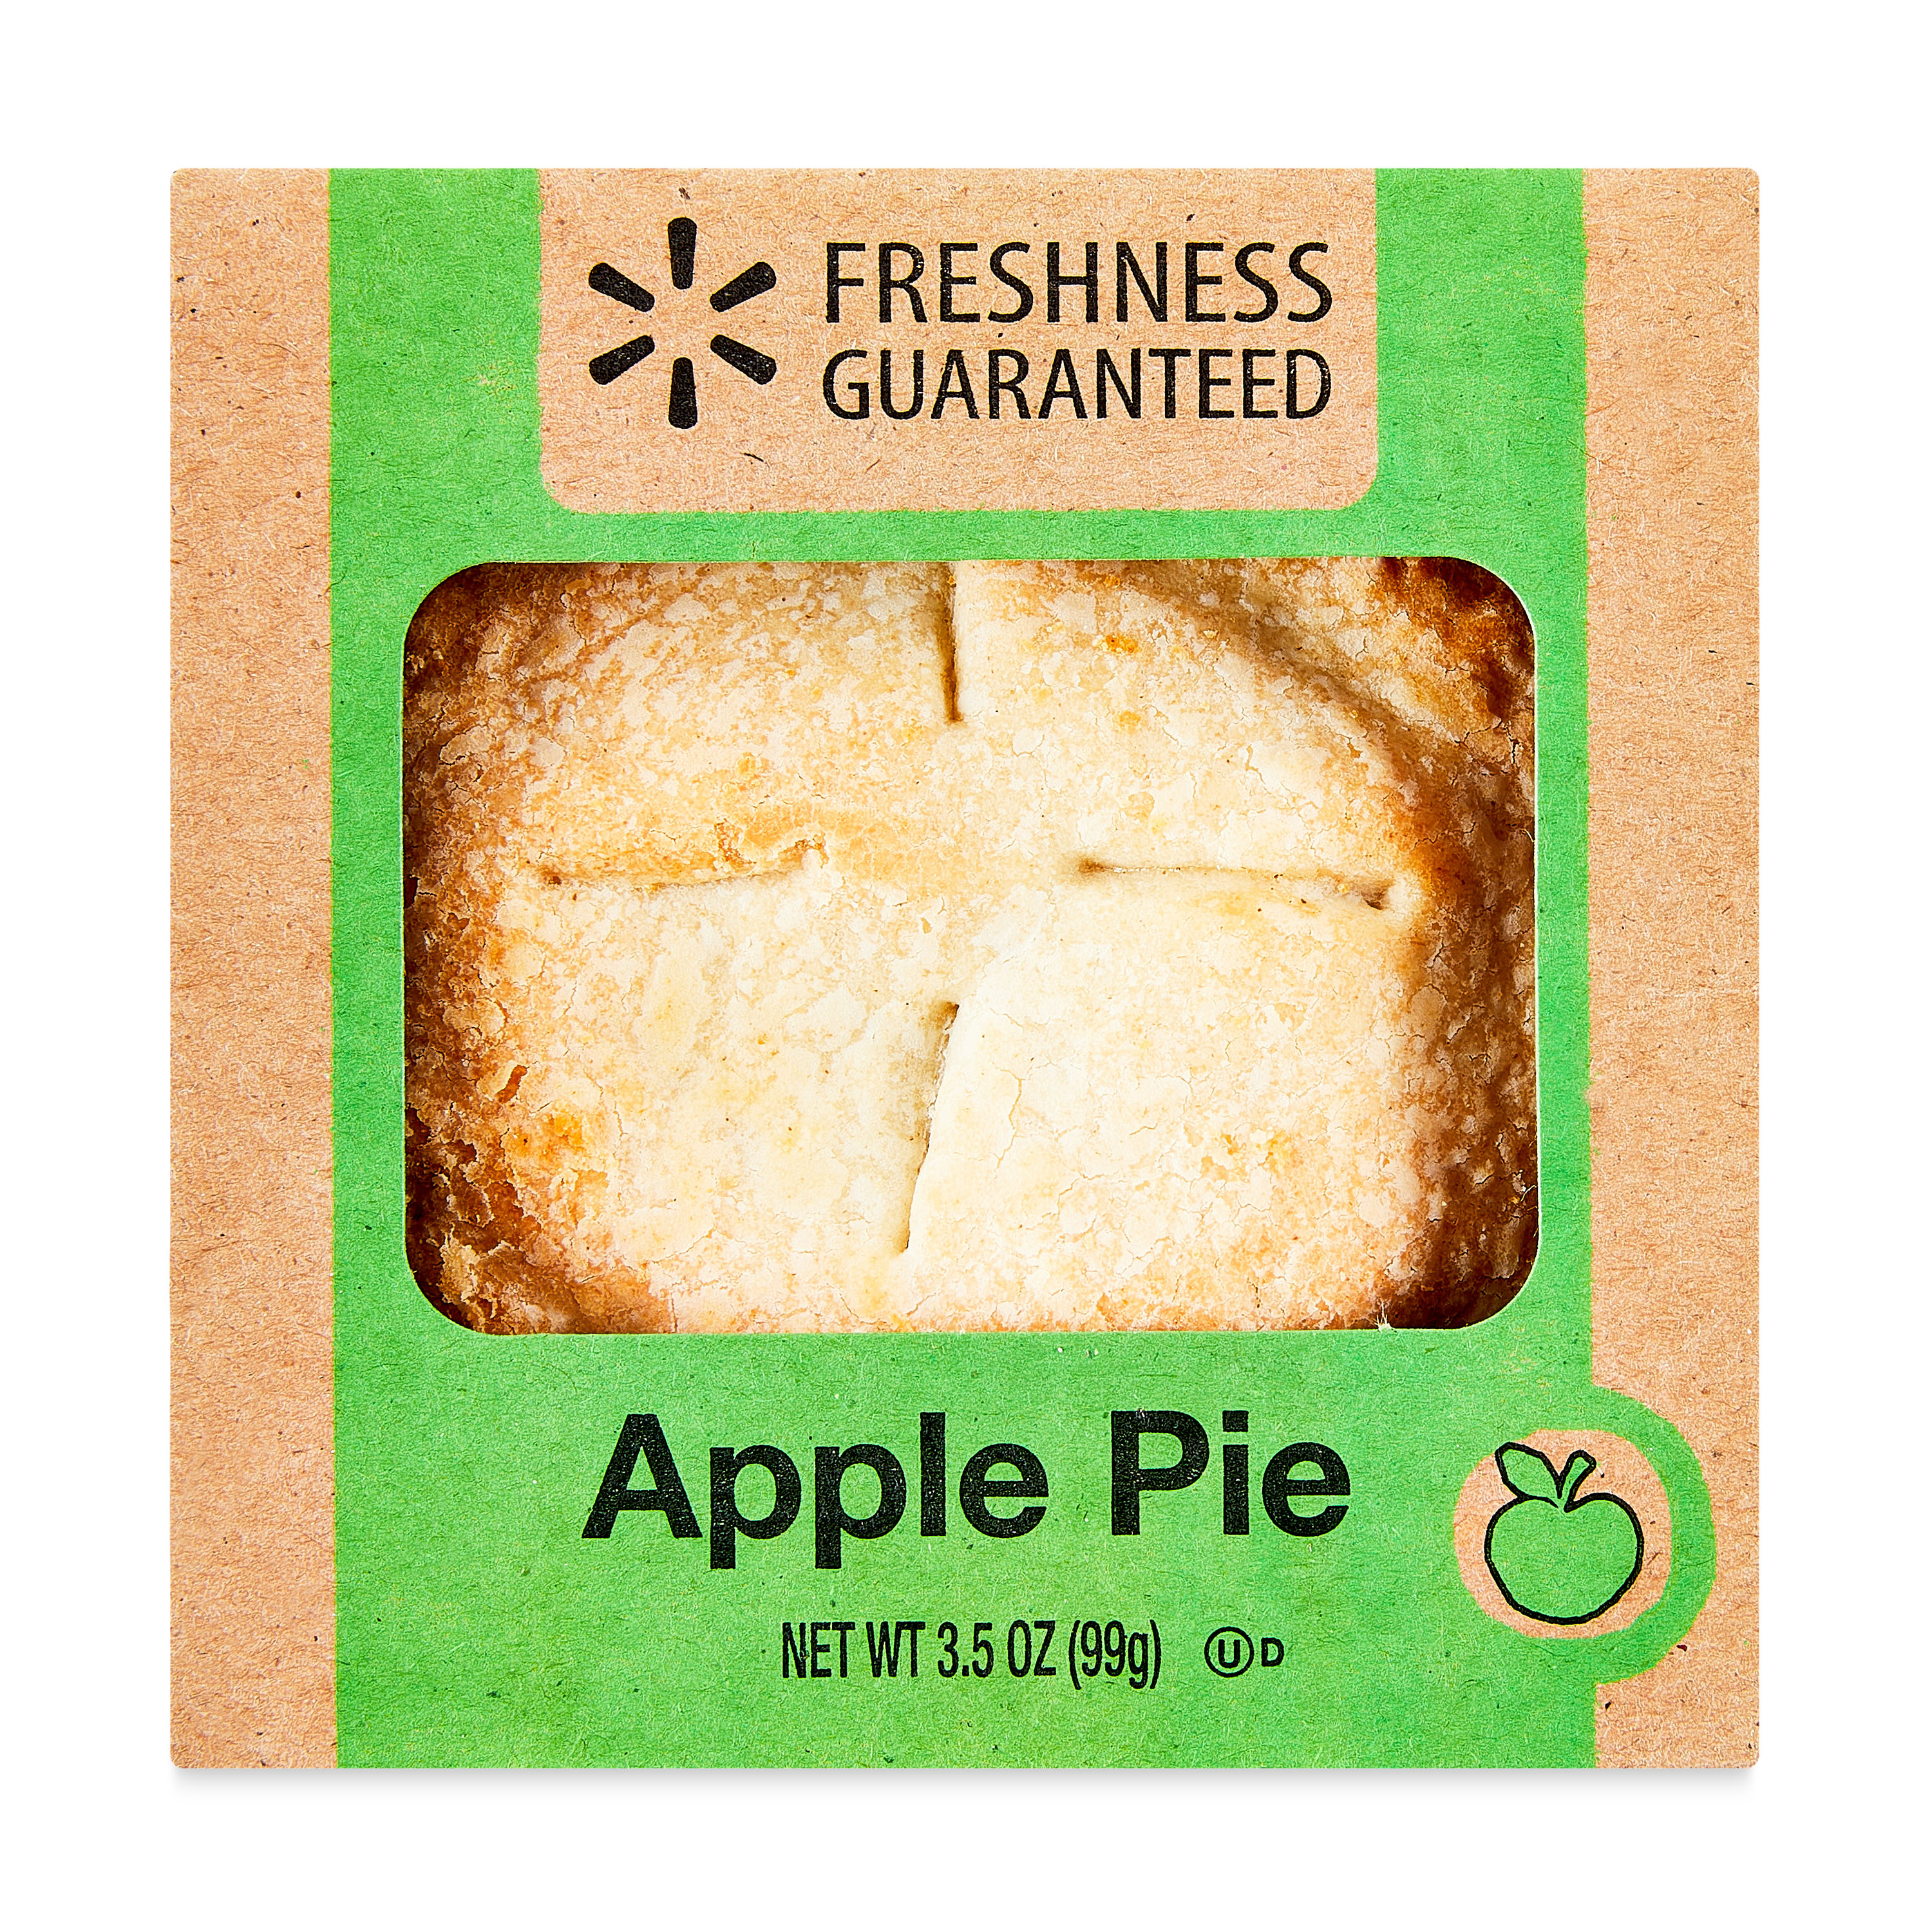 Freshness Guaranteed Apple Pie, 4 in, 3.5 oz - image 4 of 9